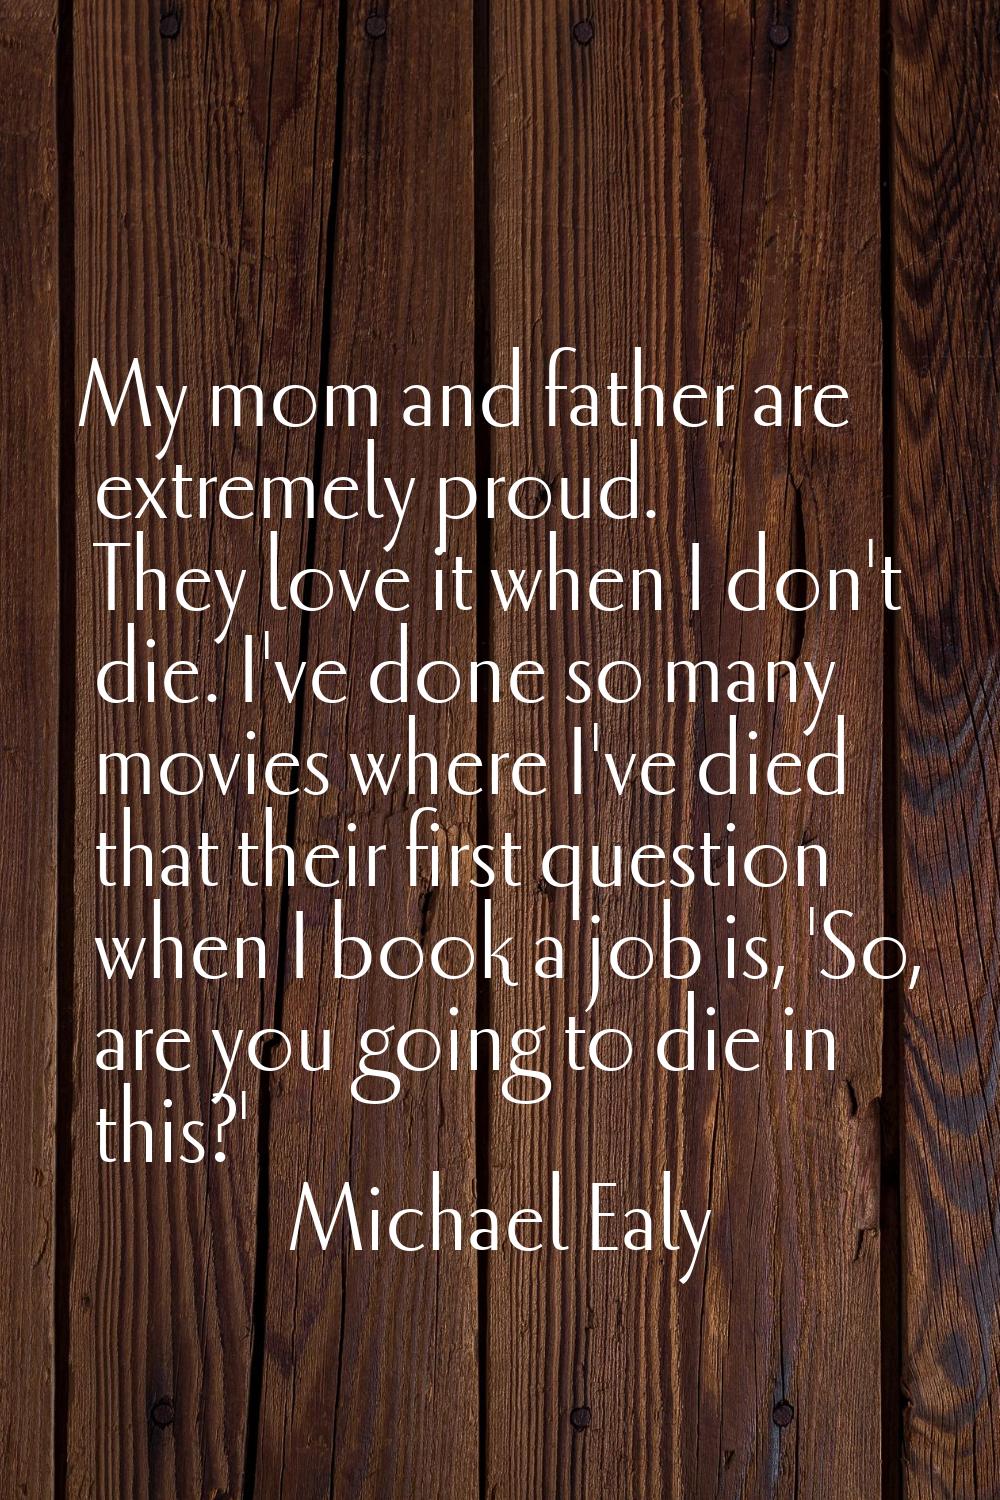 My mom and father are extremely proud. They love it when I don't die. I've done so many movies wher